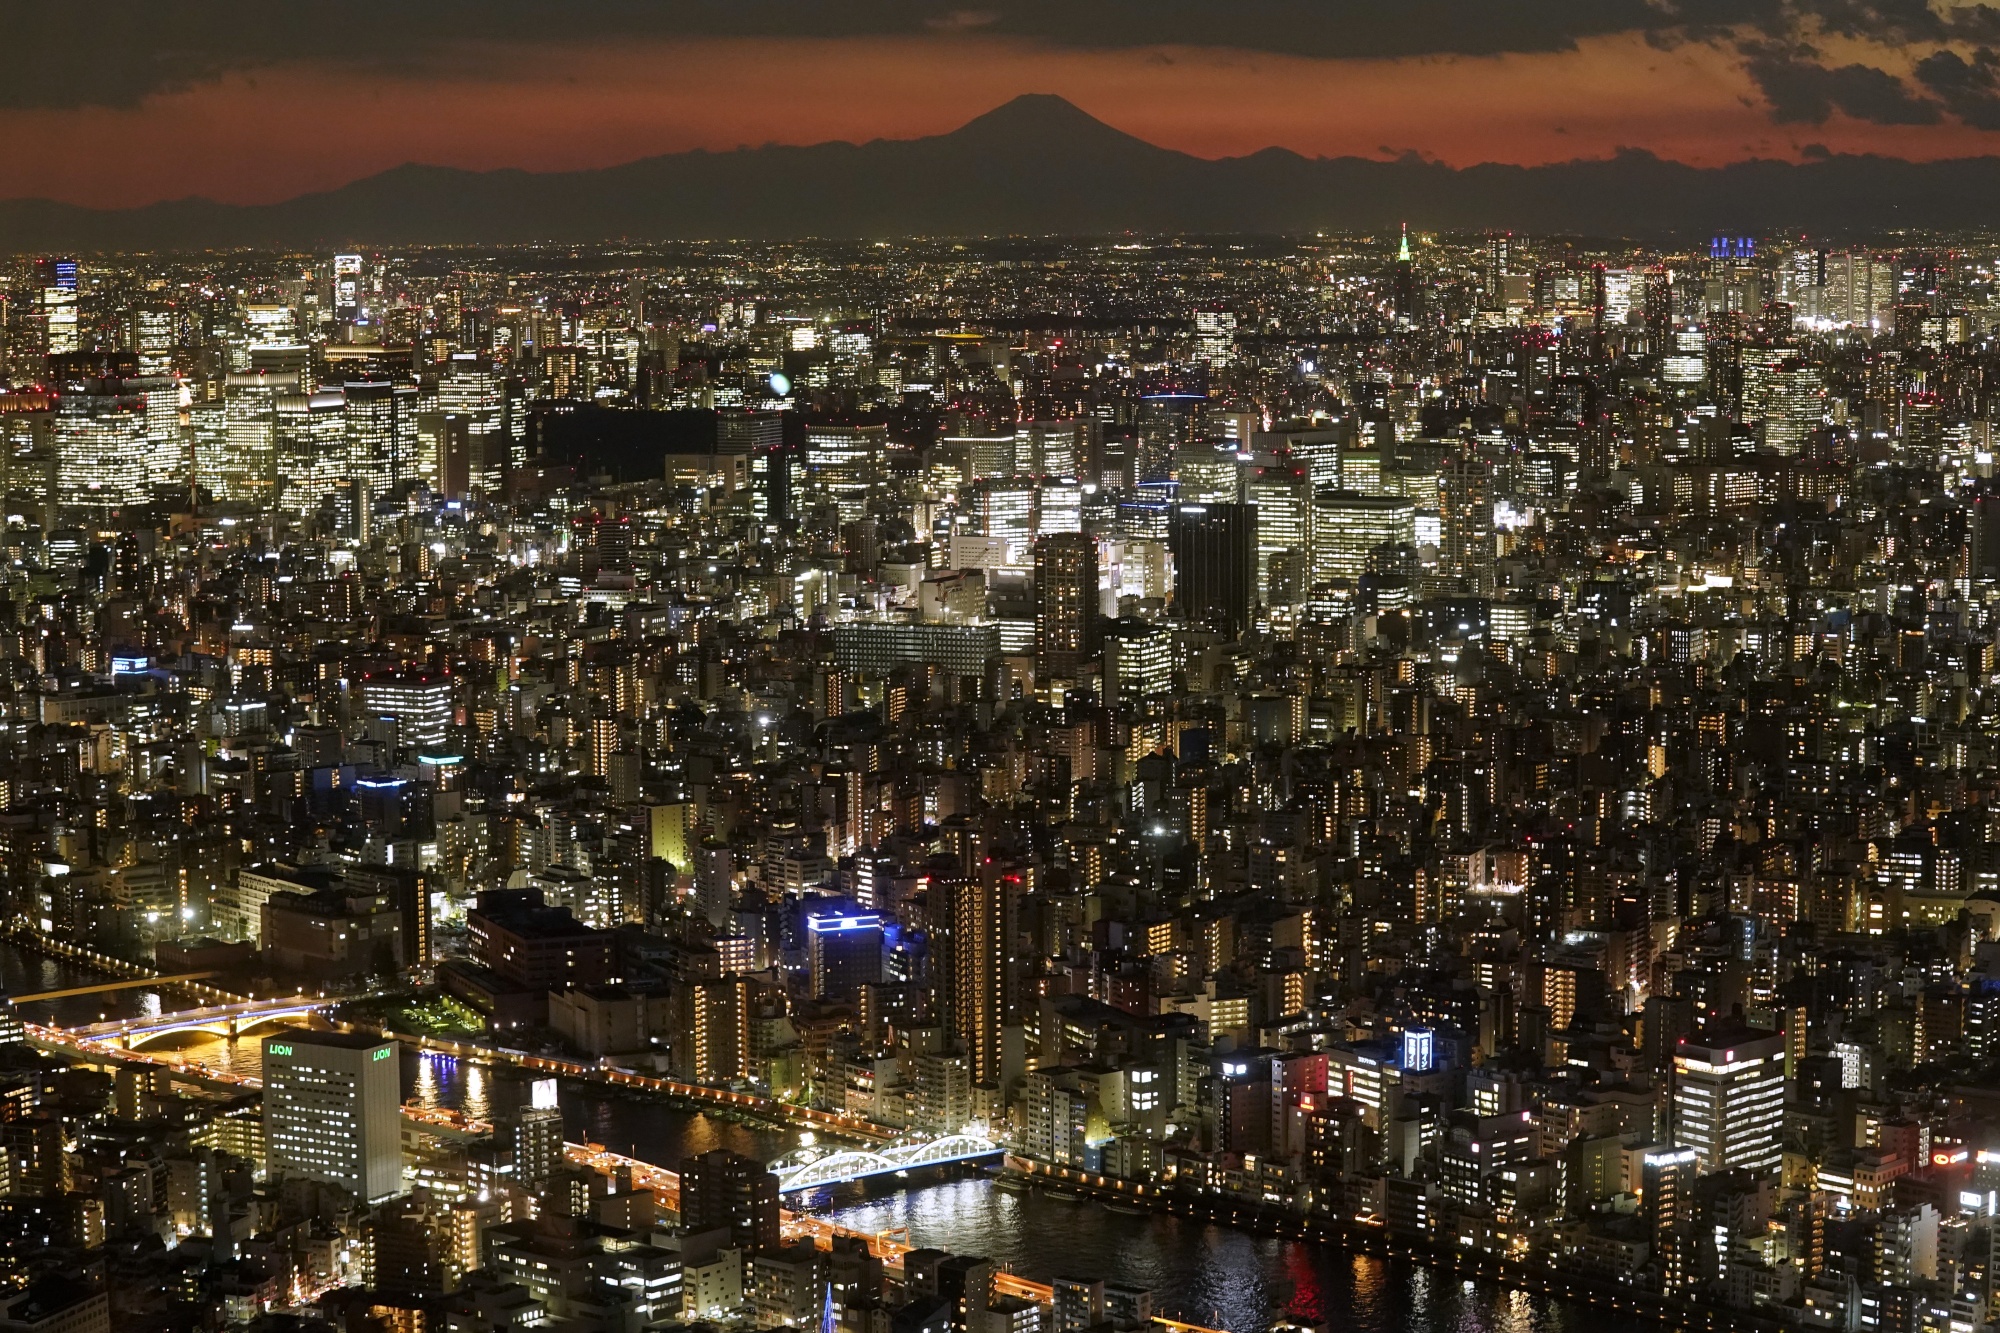 The city of Tokyo from Skytree, the world’s tallest broadcasting tower at 634 meters.